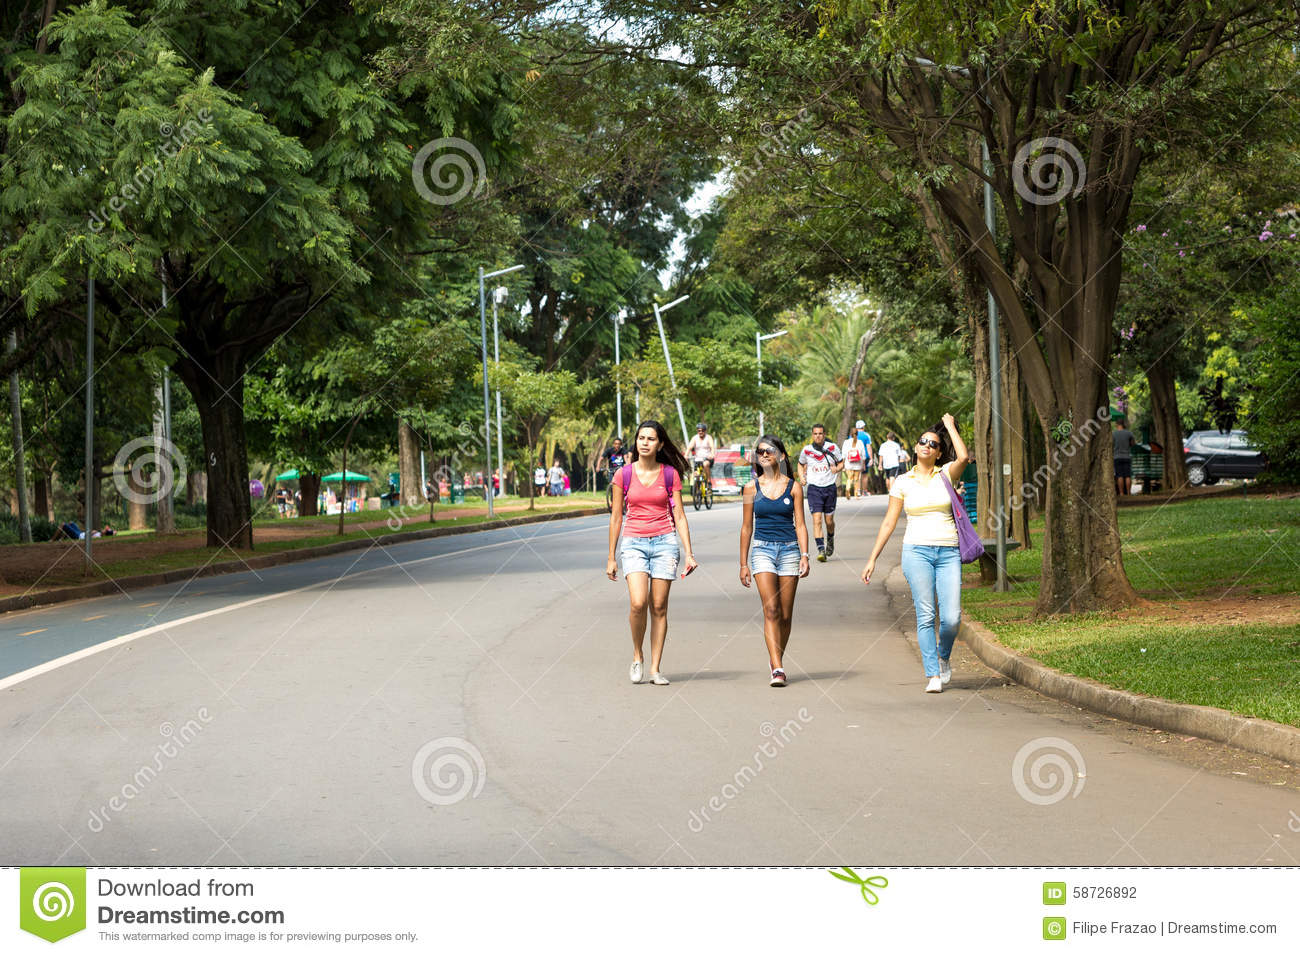 People Enjoy A Hot Day In Ibirapuera Park In Sao Paulo, Brazil.